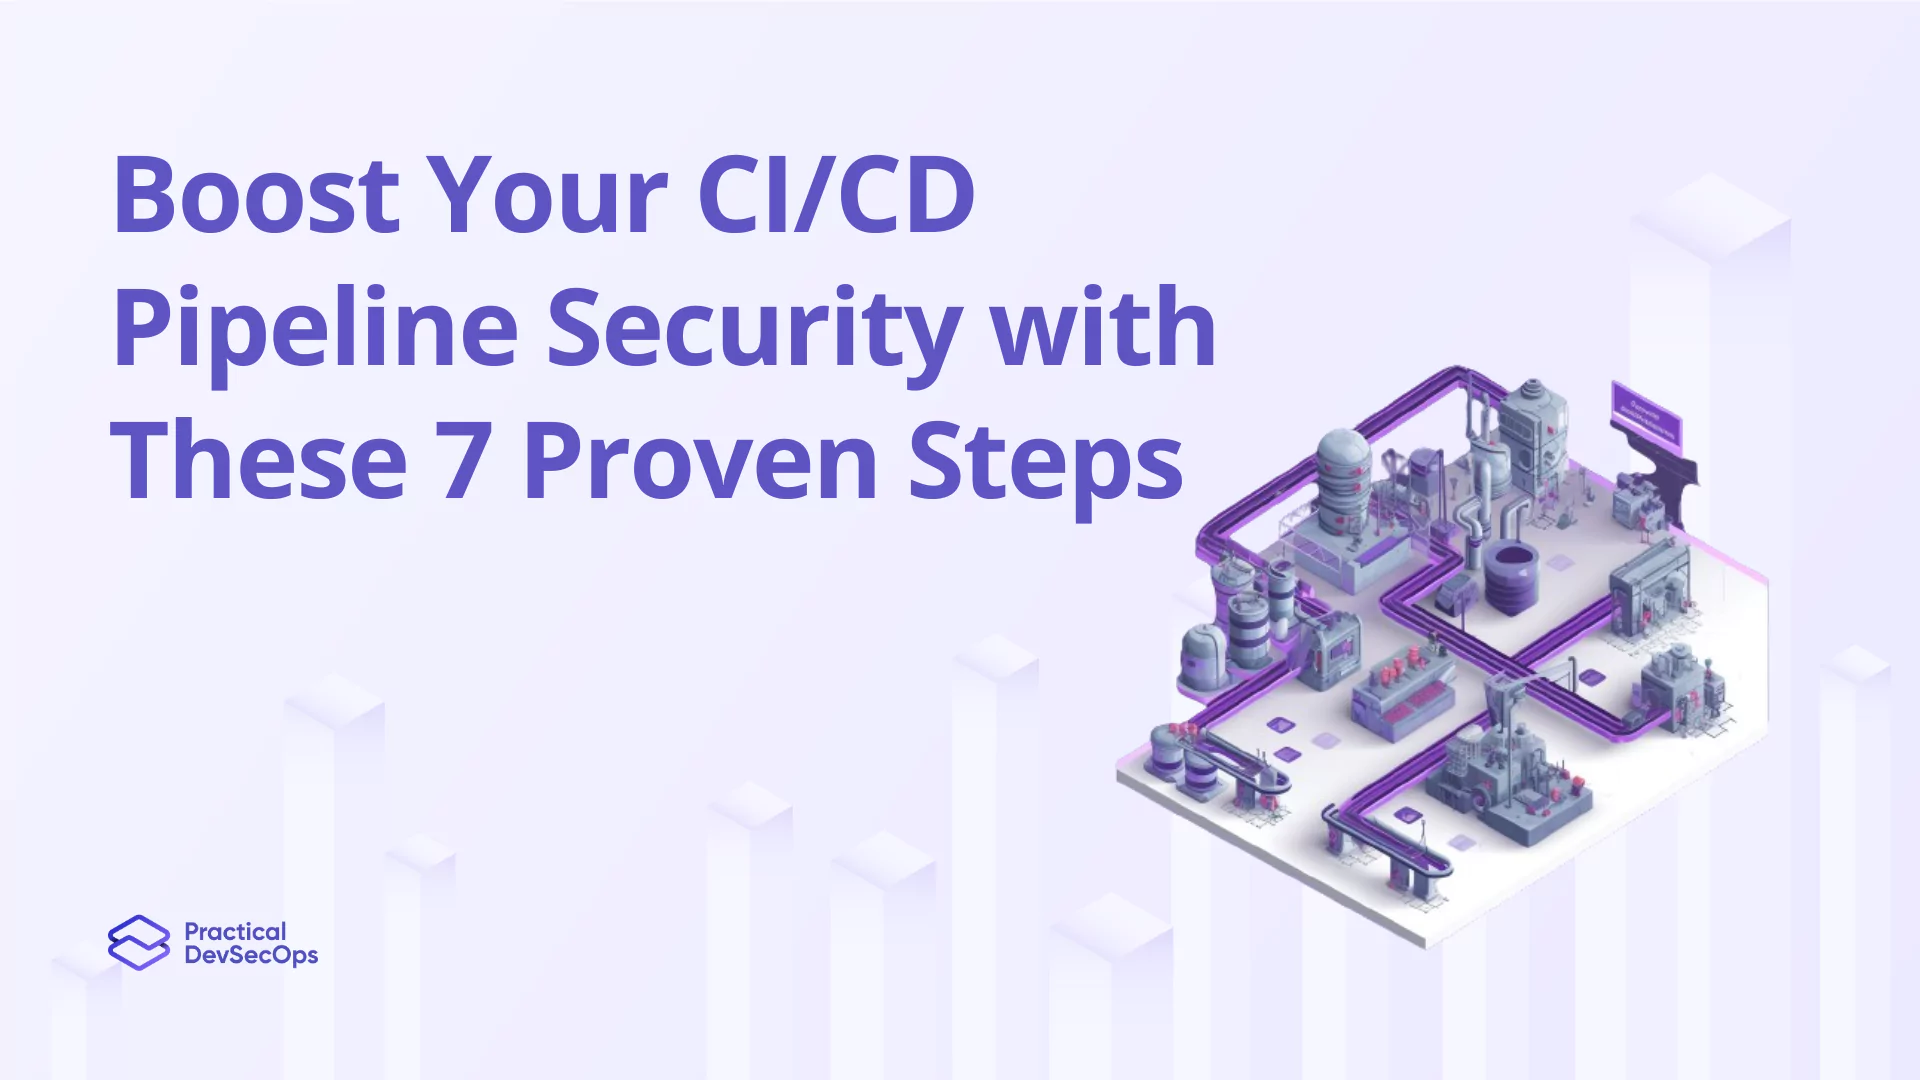 Boost Your CICD Pipeline Security with These 7 Proven Steps at Practical-DevSecOps